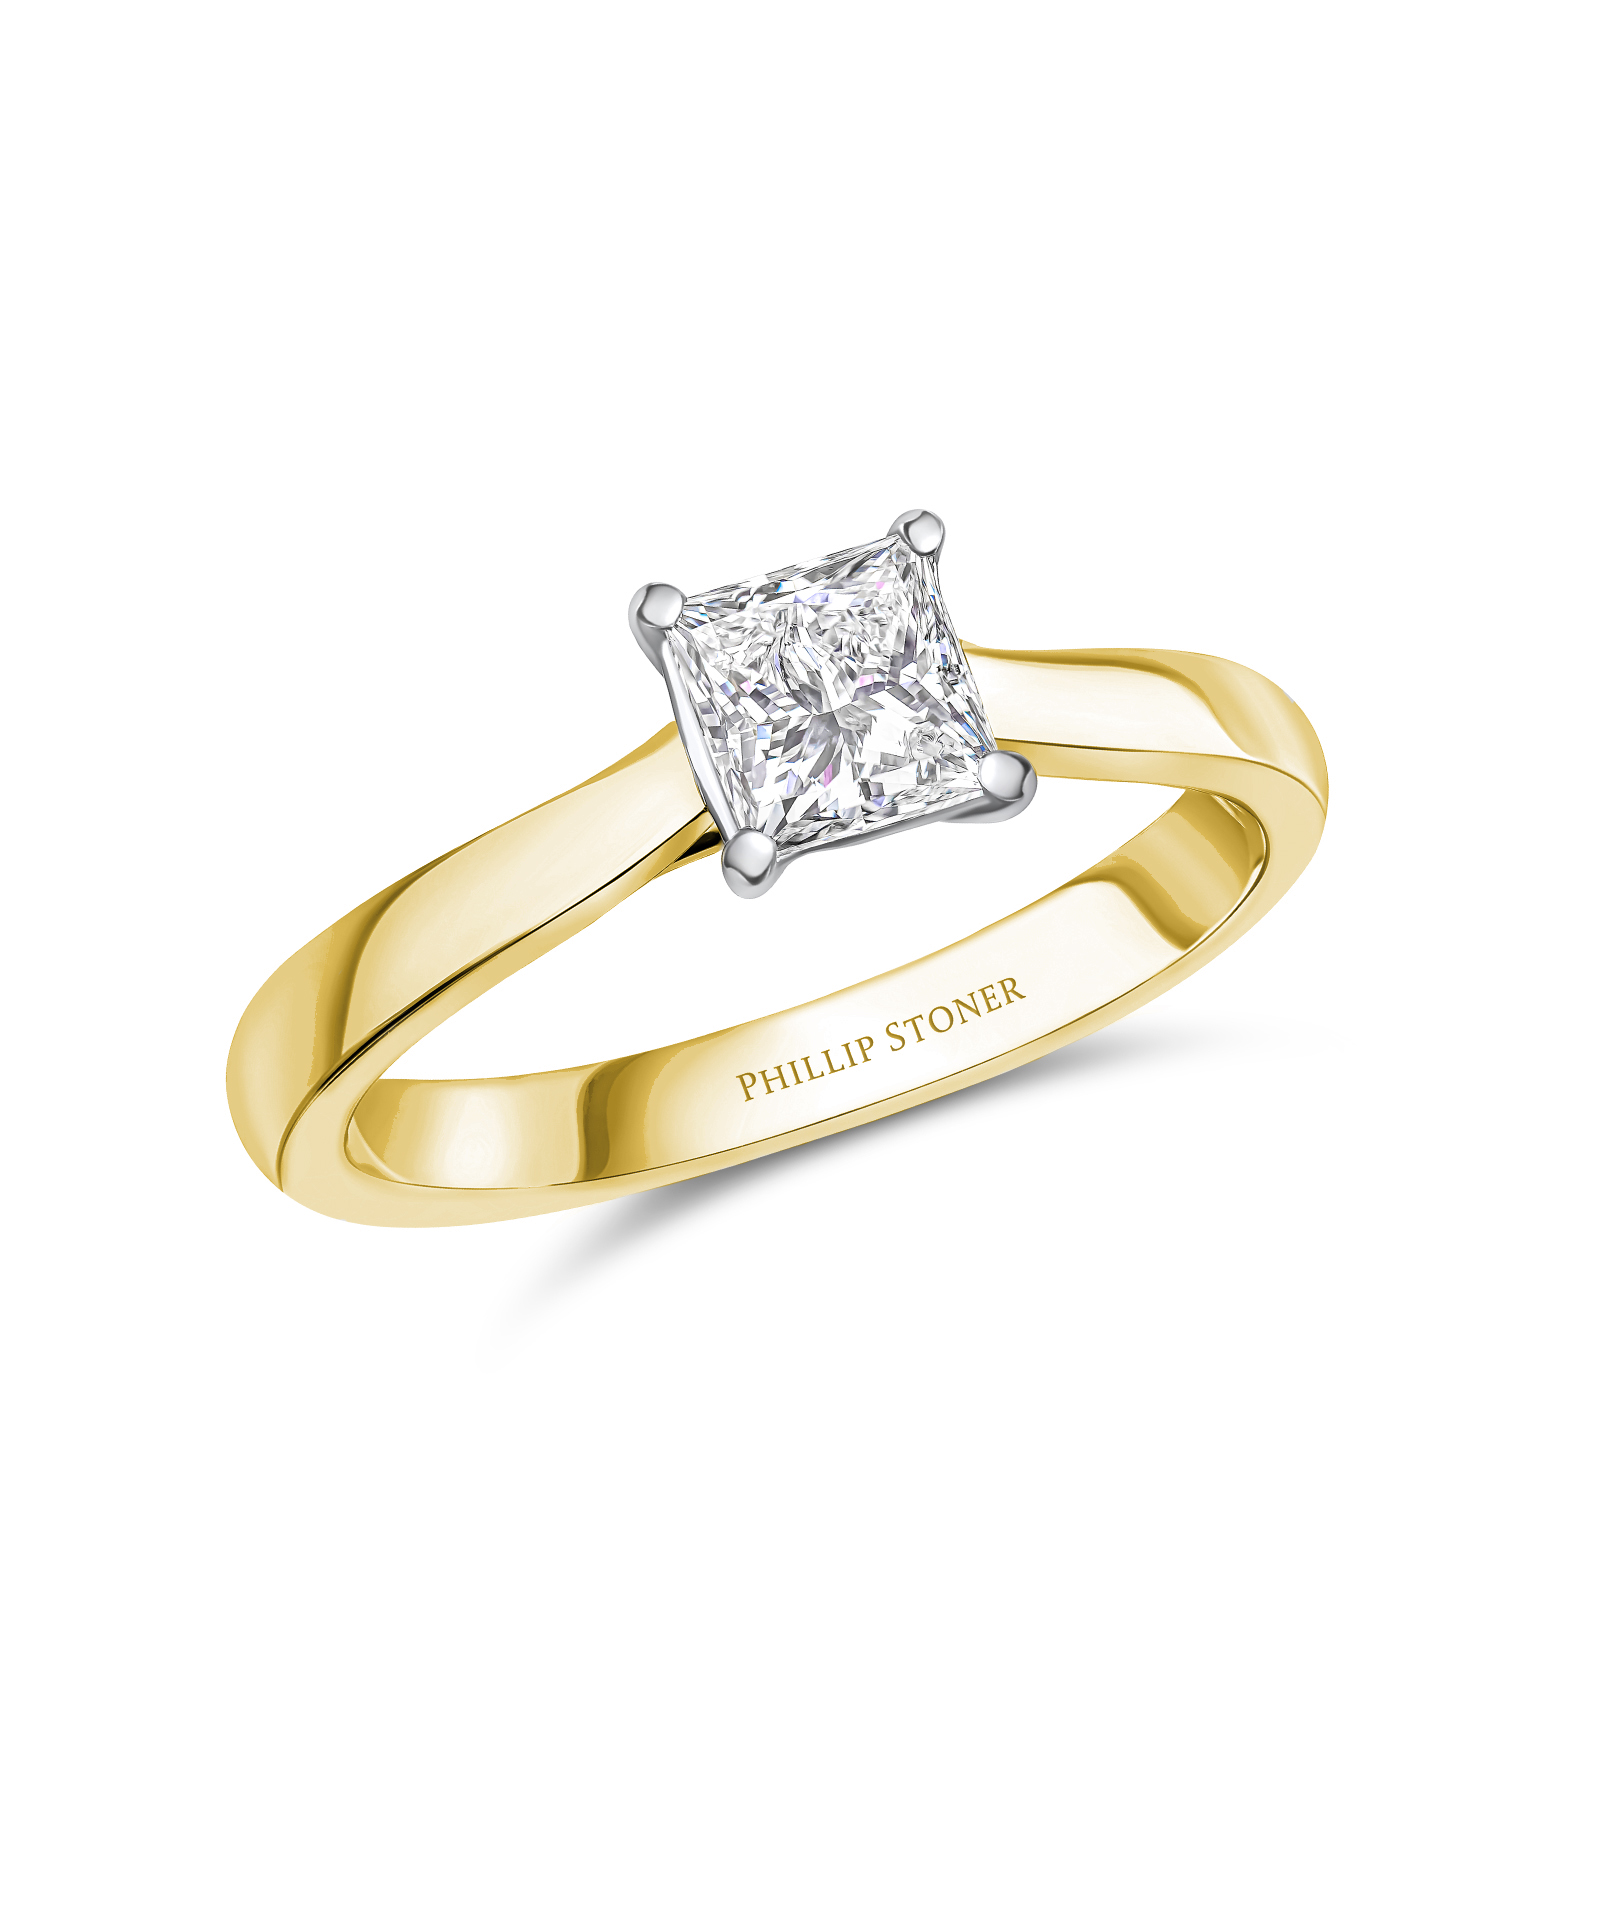 0.70ct Princess Cut Diamond Solitaire Yellow Gold Engagement Ring - Phillip Stoner The Jeweller